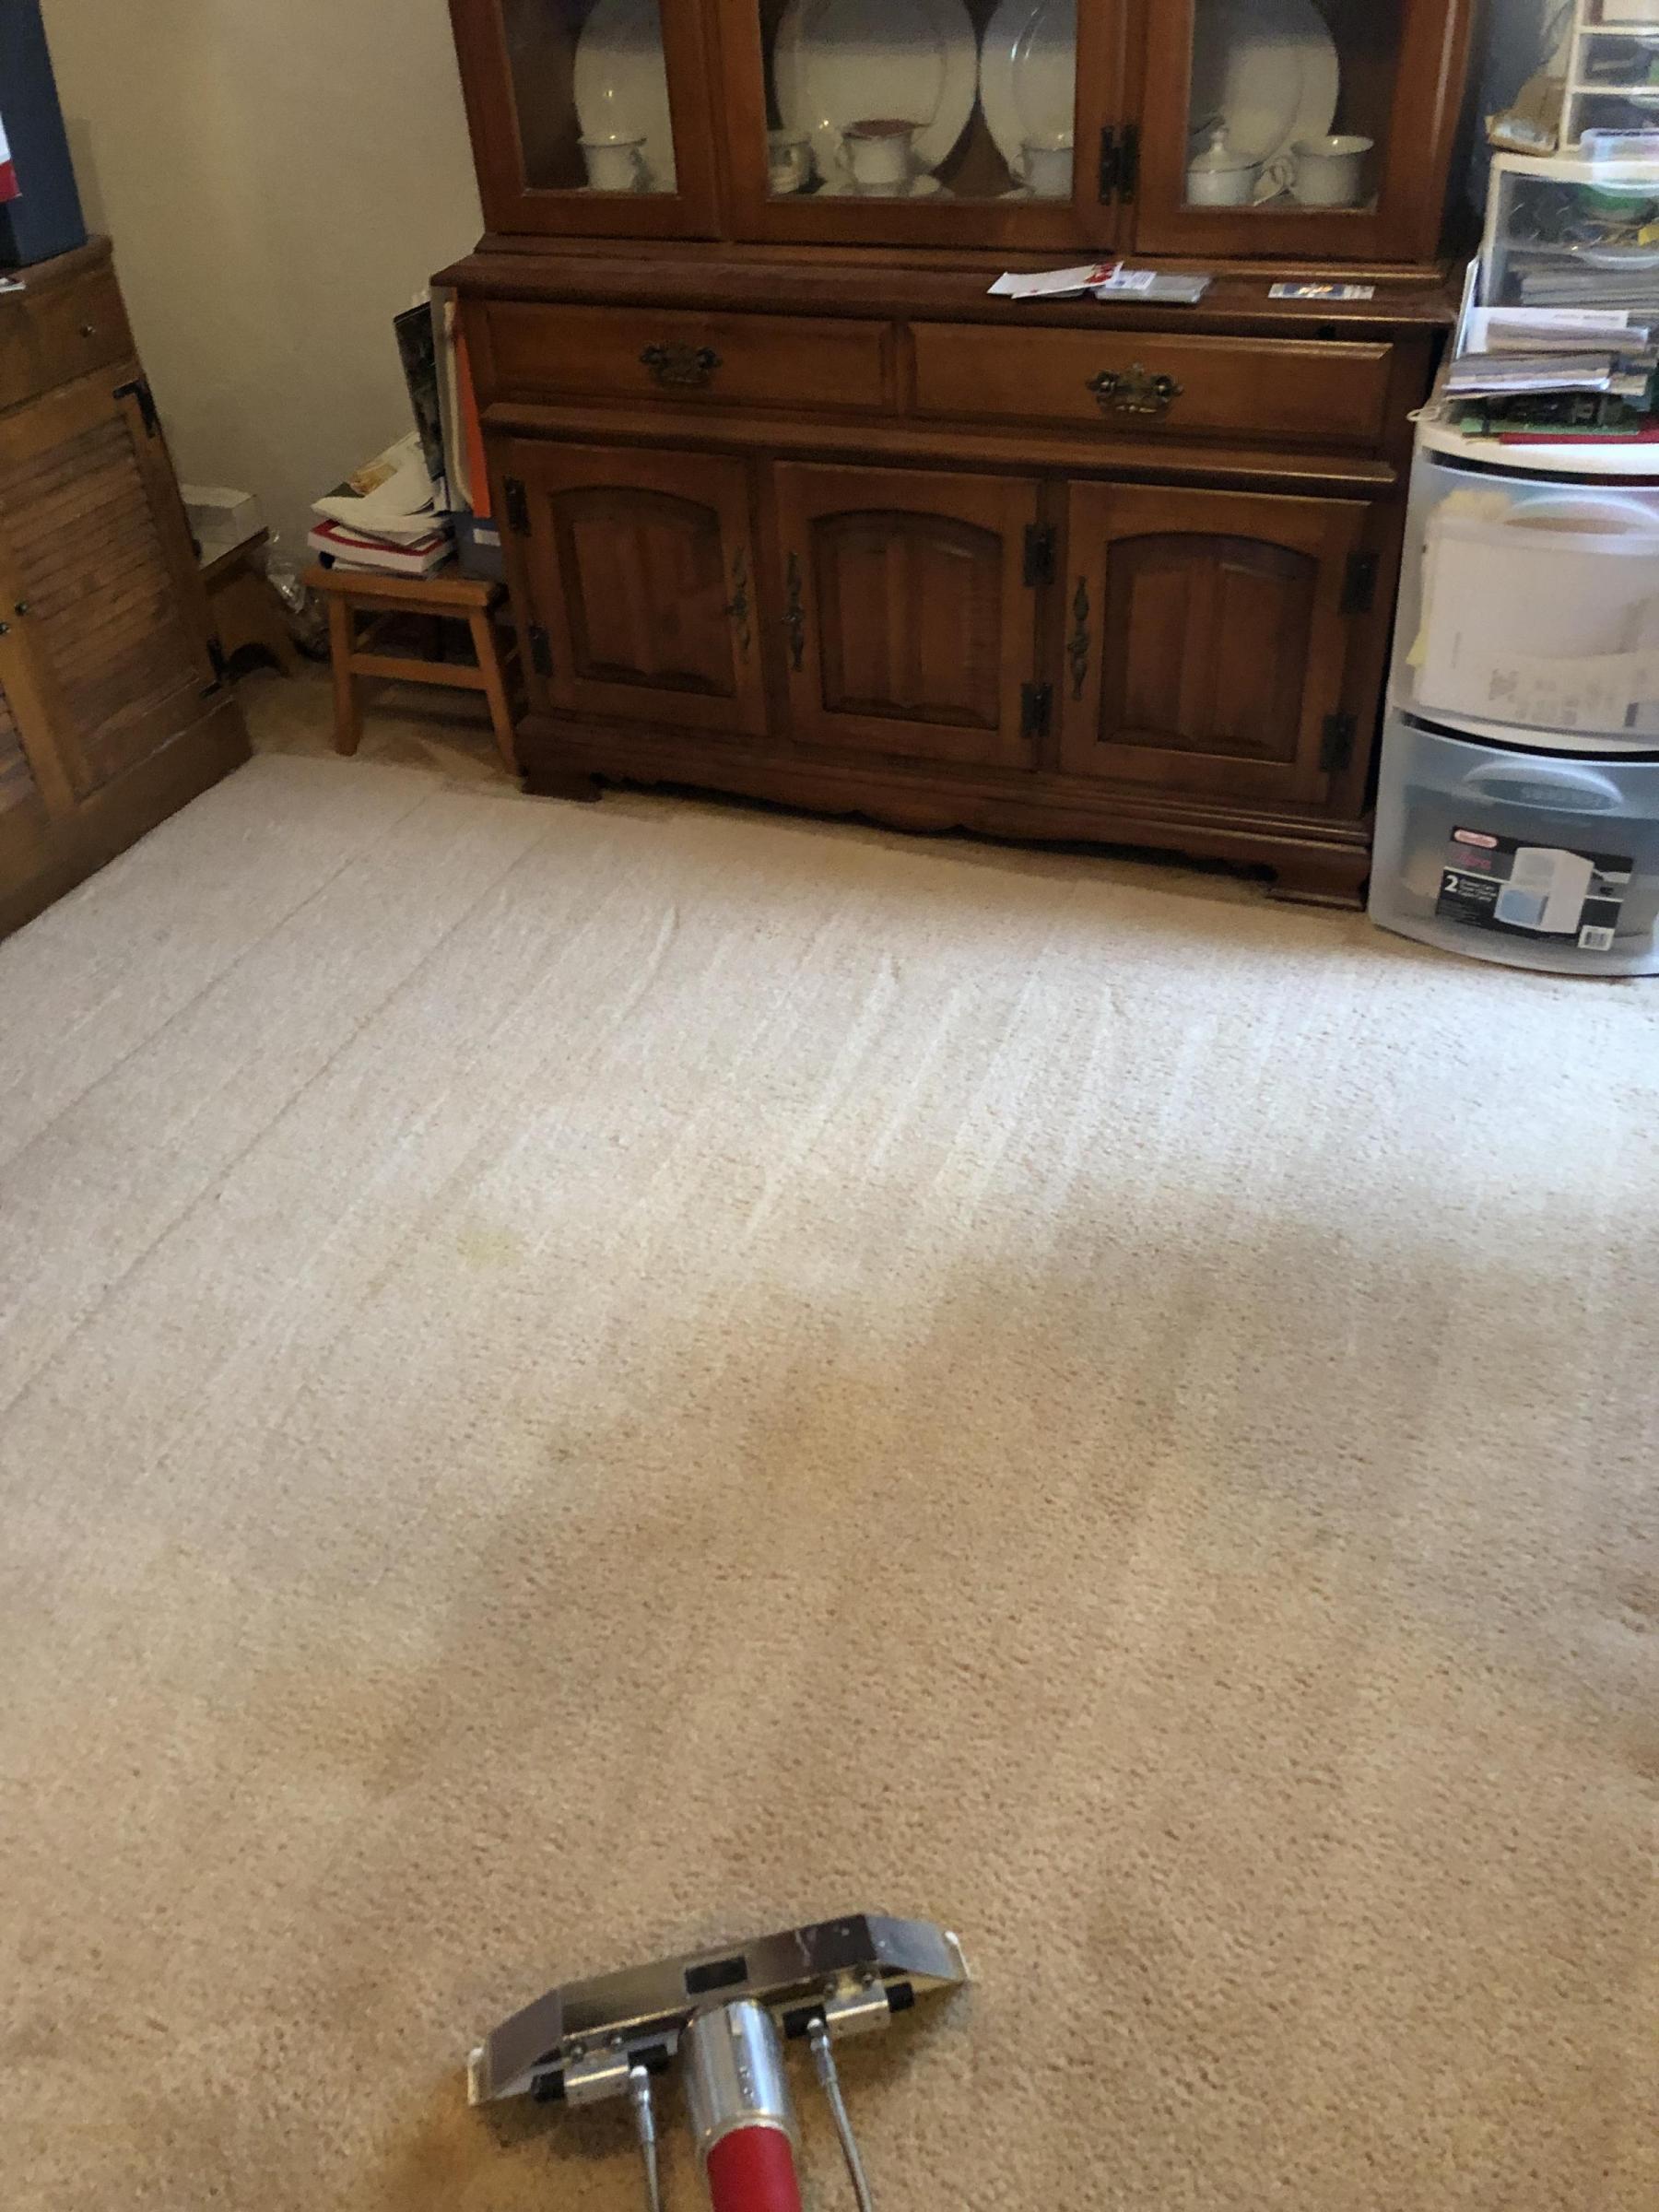 How To Keep New Look Carpet? Prescott Valley Carpet Cleaning